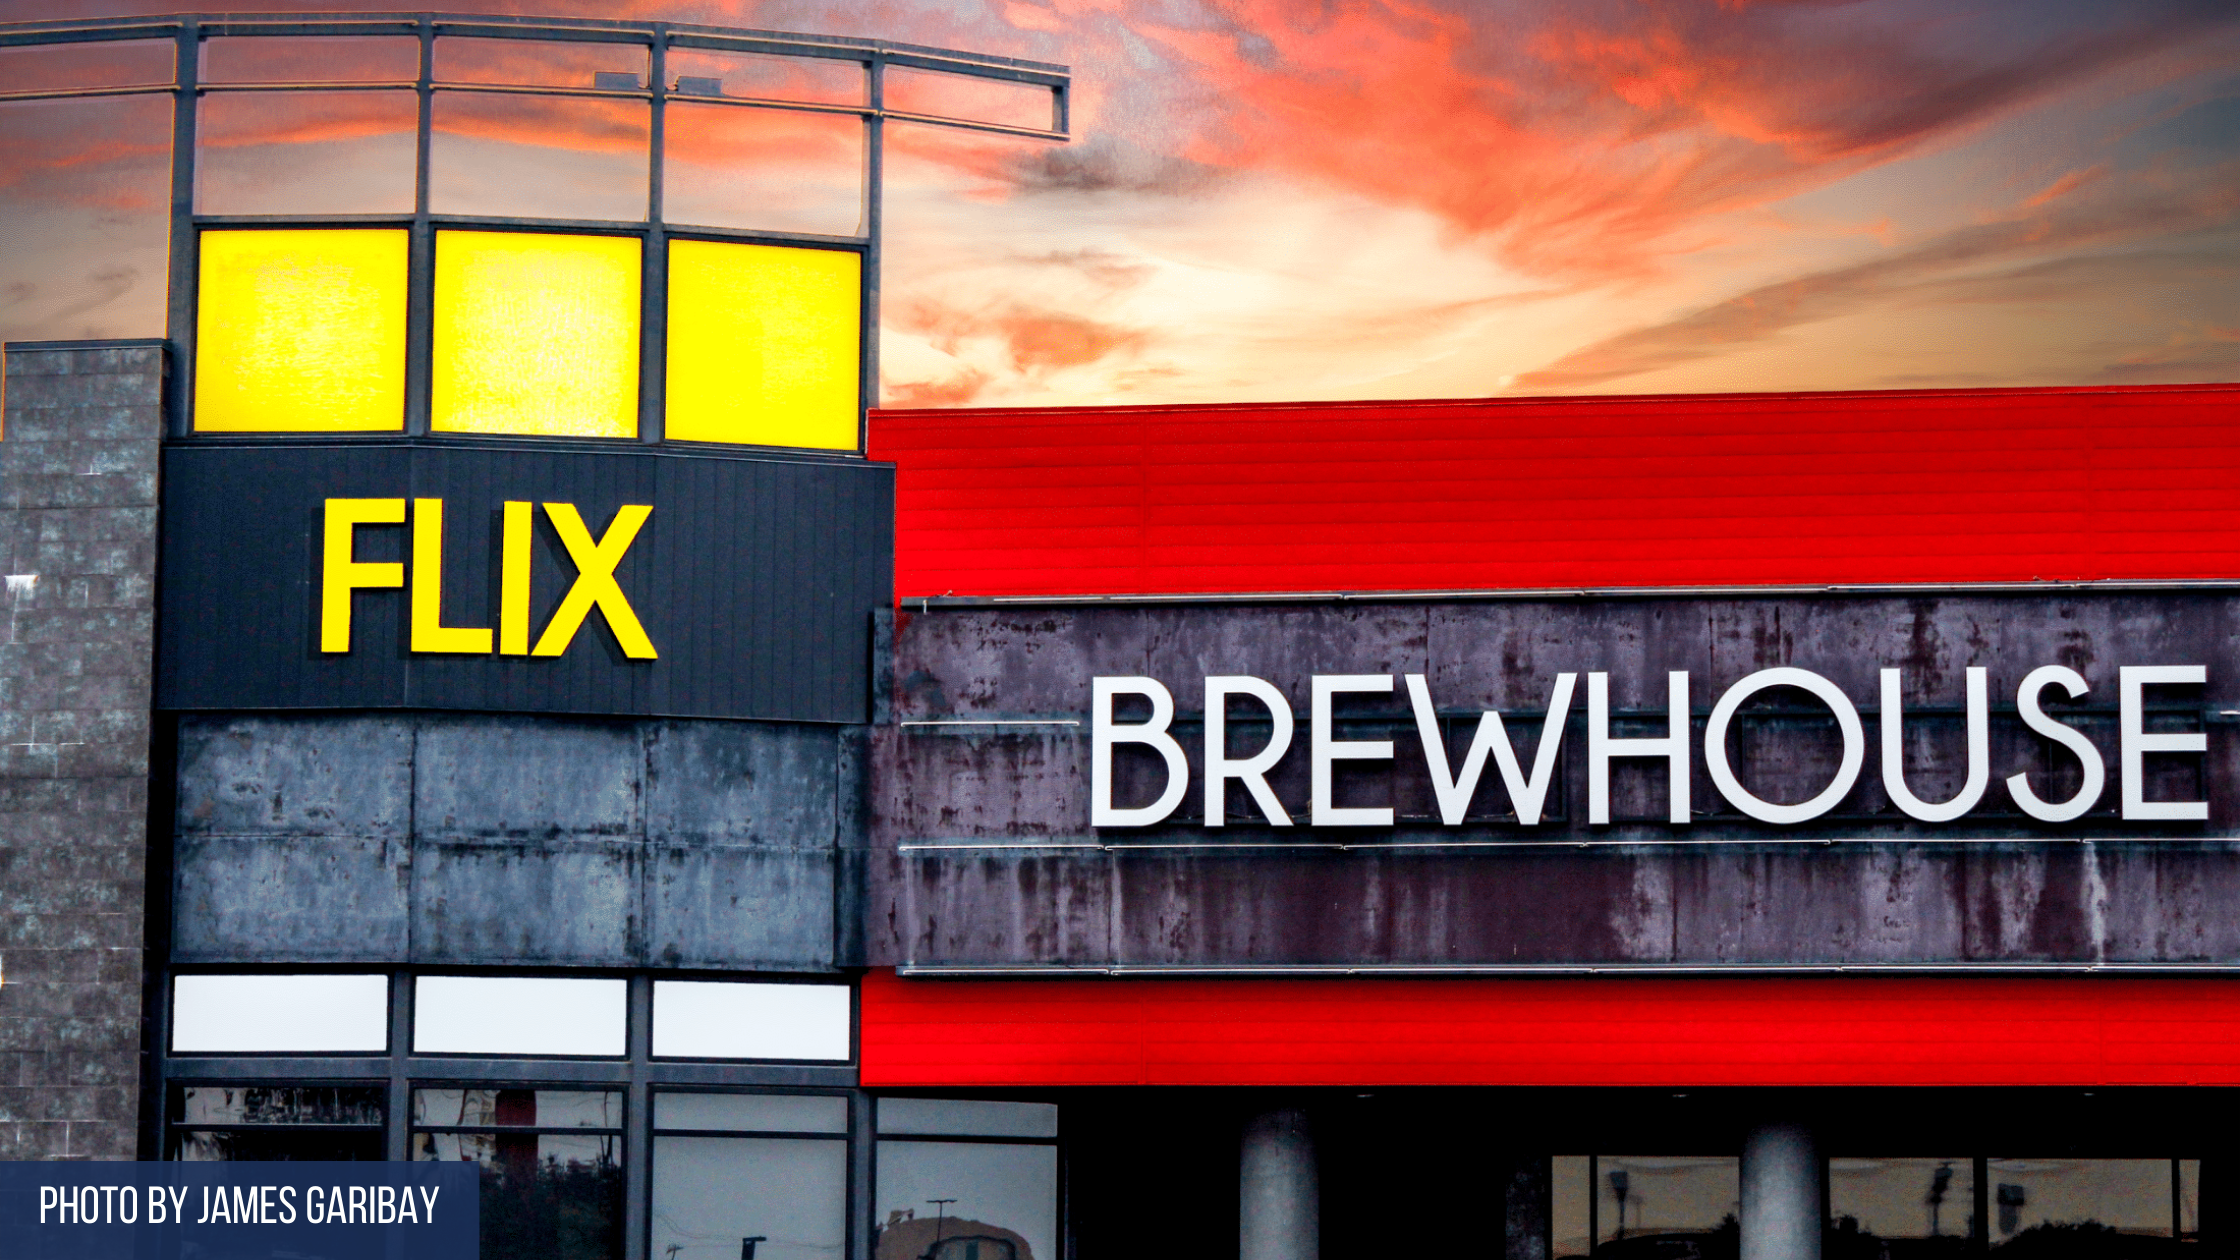 Flix Brewhouse (Round Rock) - Flix Brewhouse is great for a night out by yourself or with someone else. A Microbrewery onsite sets this theater apart from others. The beers are super tasty and there is something for most, if not all beer drinkers. Menu items are delicious. The tables in front of the chairs move forward so guests can eat and drink comfortably. It's a great night out!Address: 2200 S I-35 Frontage Rd b1, Round Rock, TX 78681